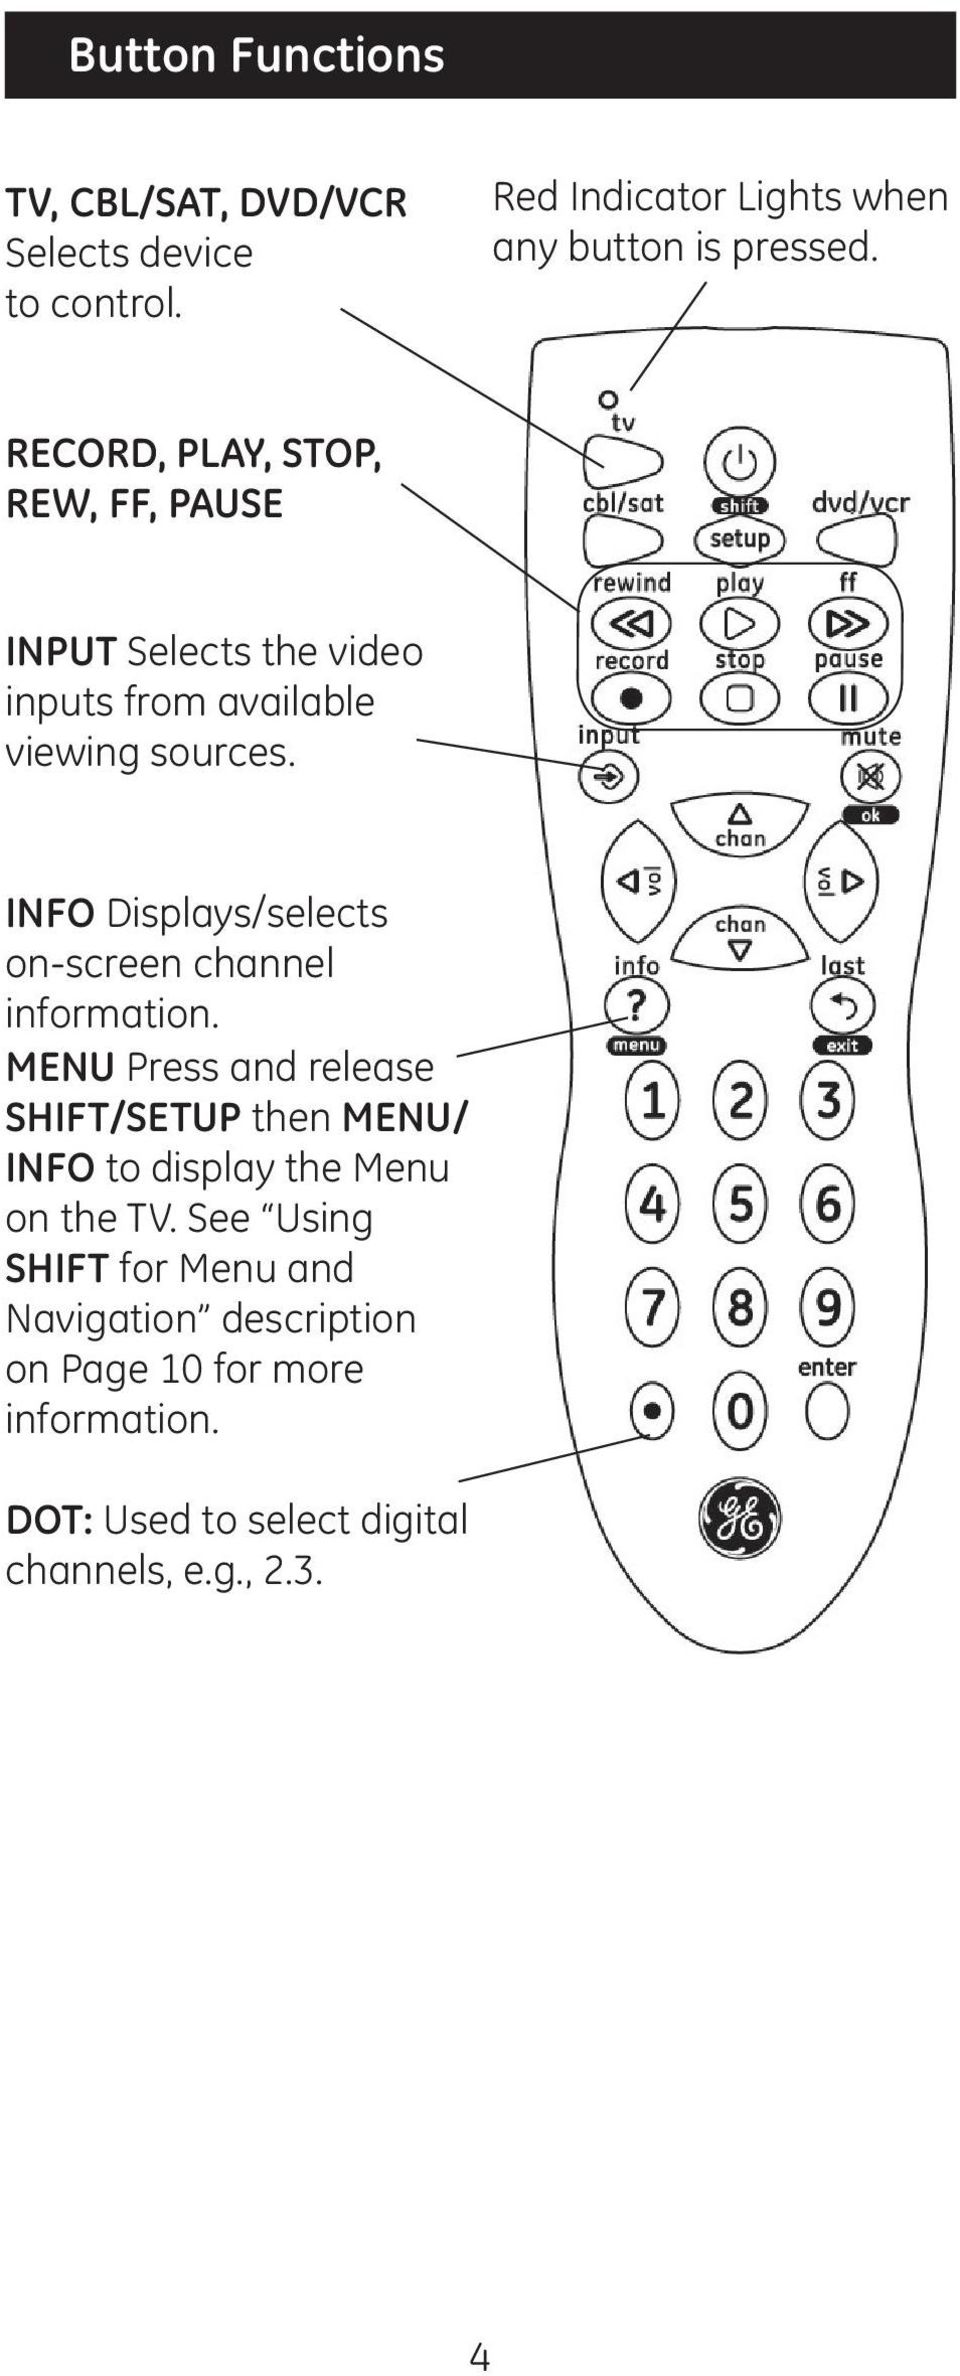 INFO Displays/selects on-screen channel information.